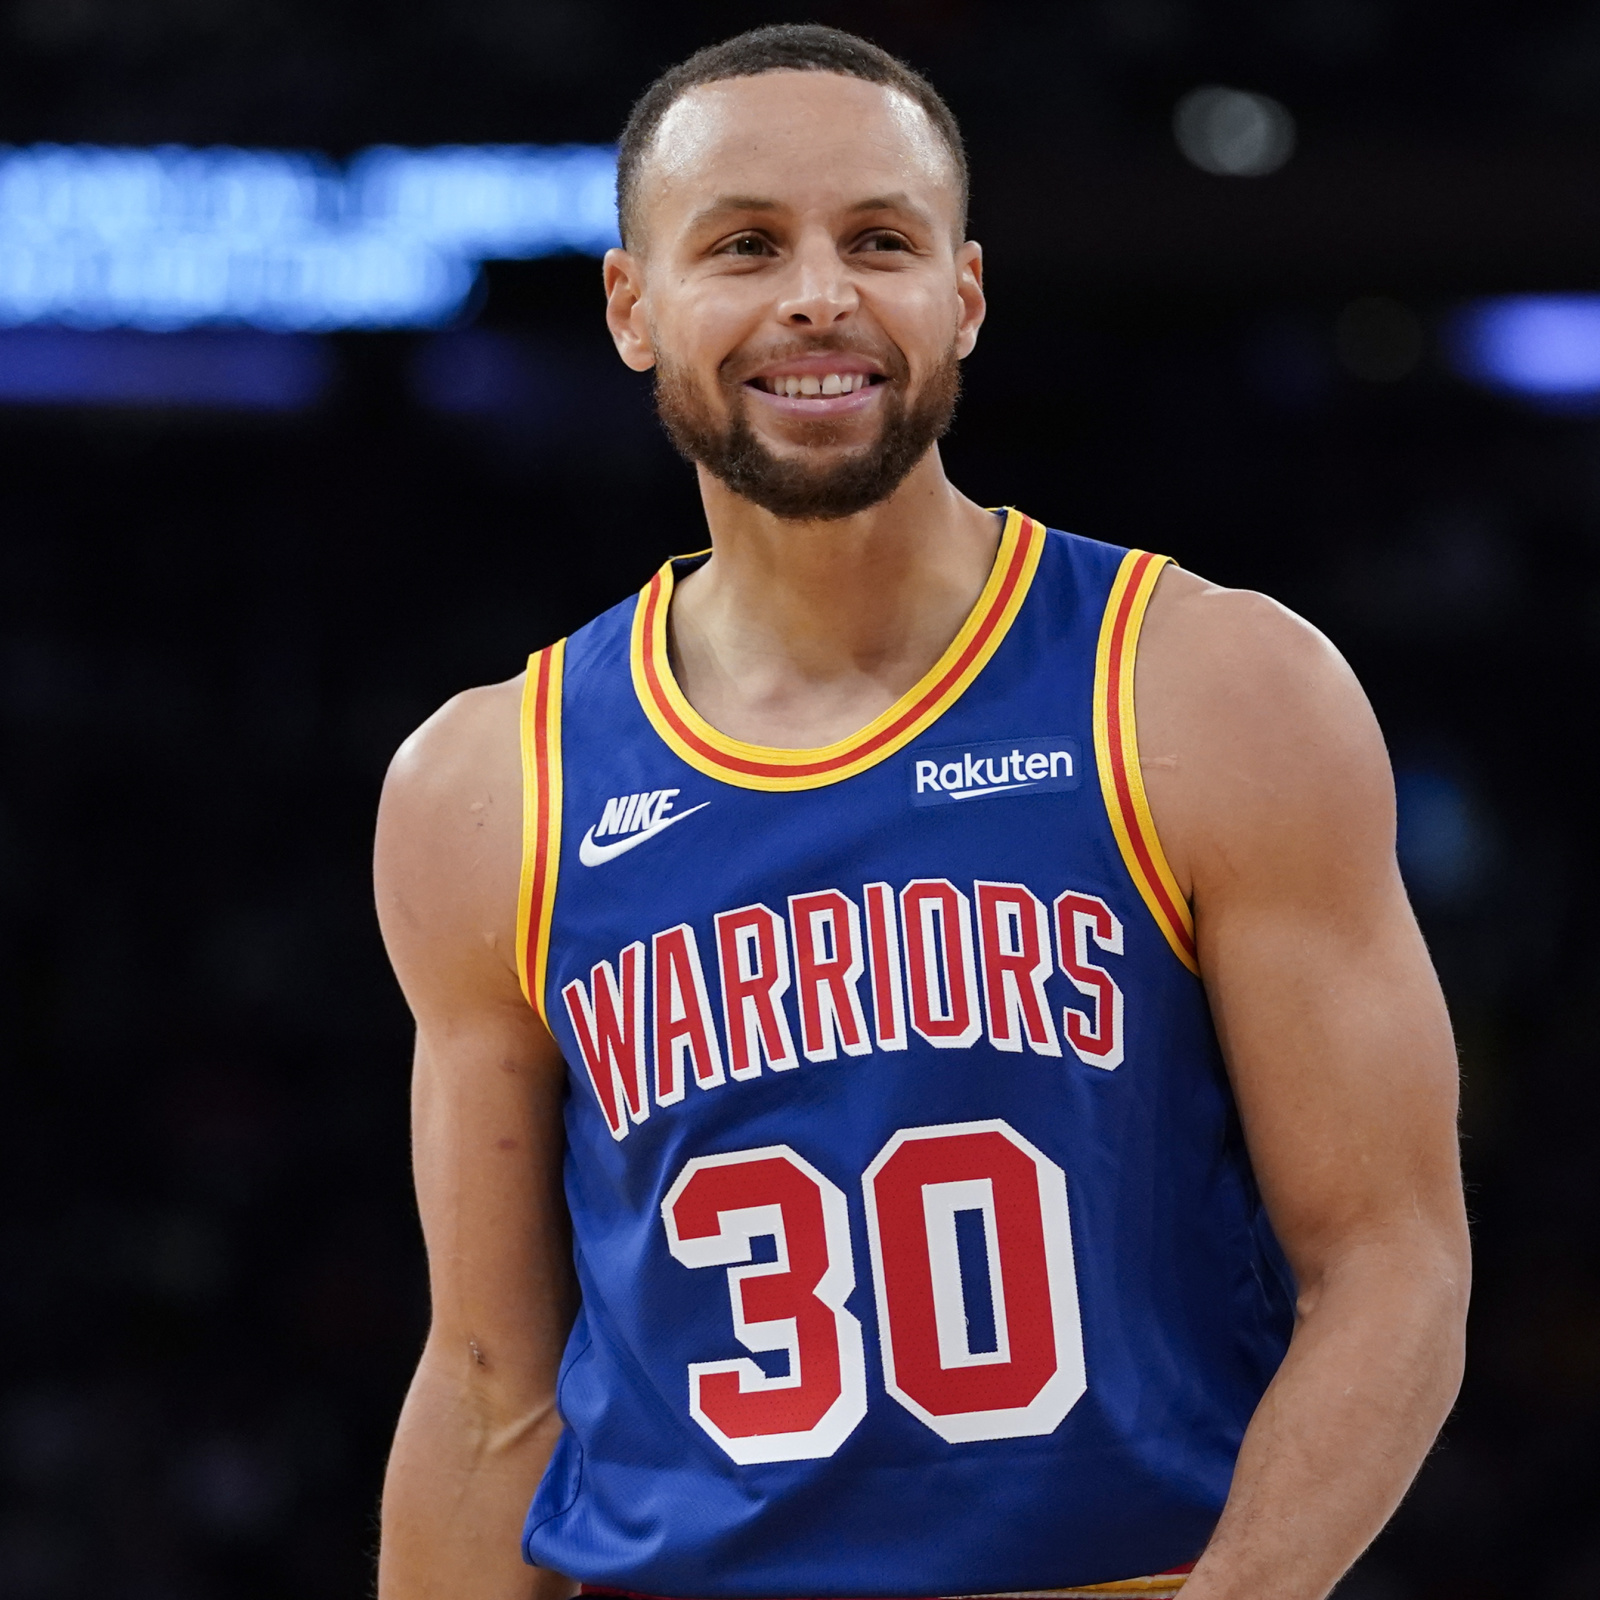 Steph Curry, LeBron James, and Kevin Durant lead league in jersey